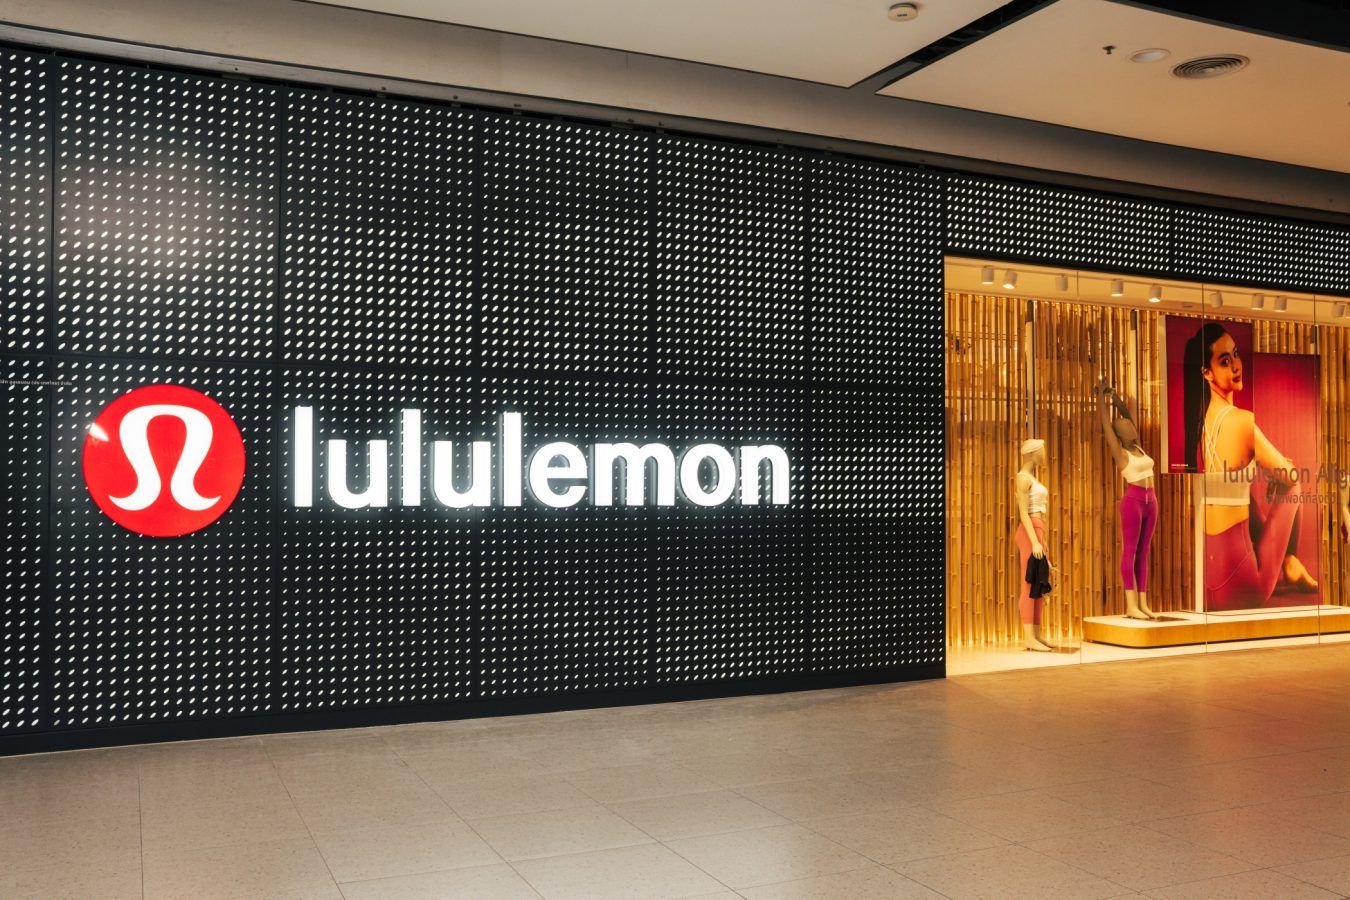 lululemon is officially in Thailand, with our very first store in